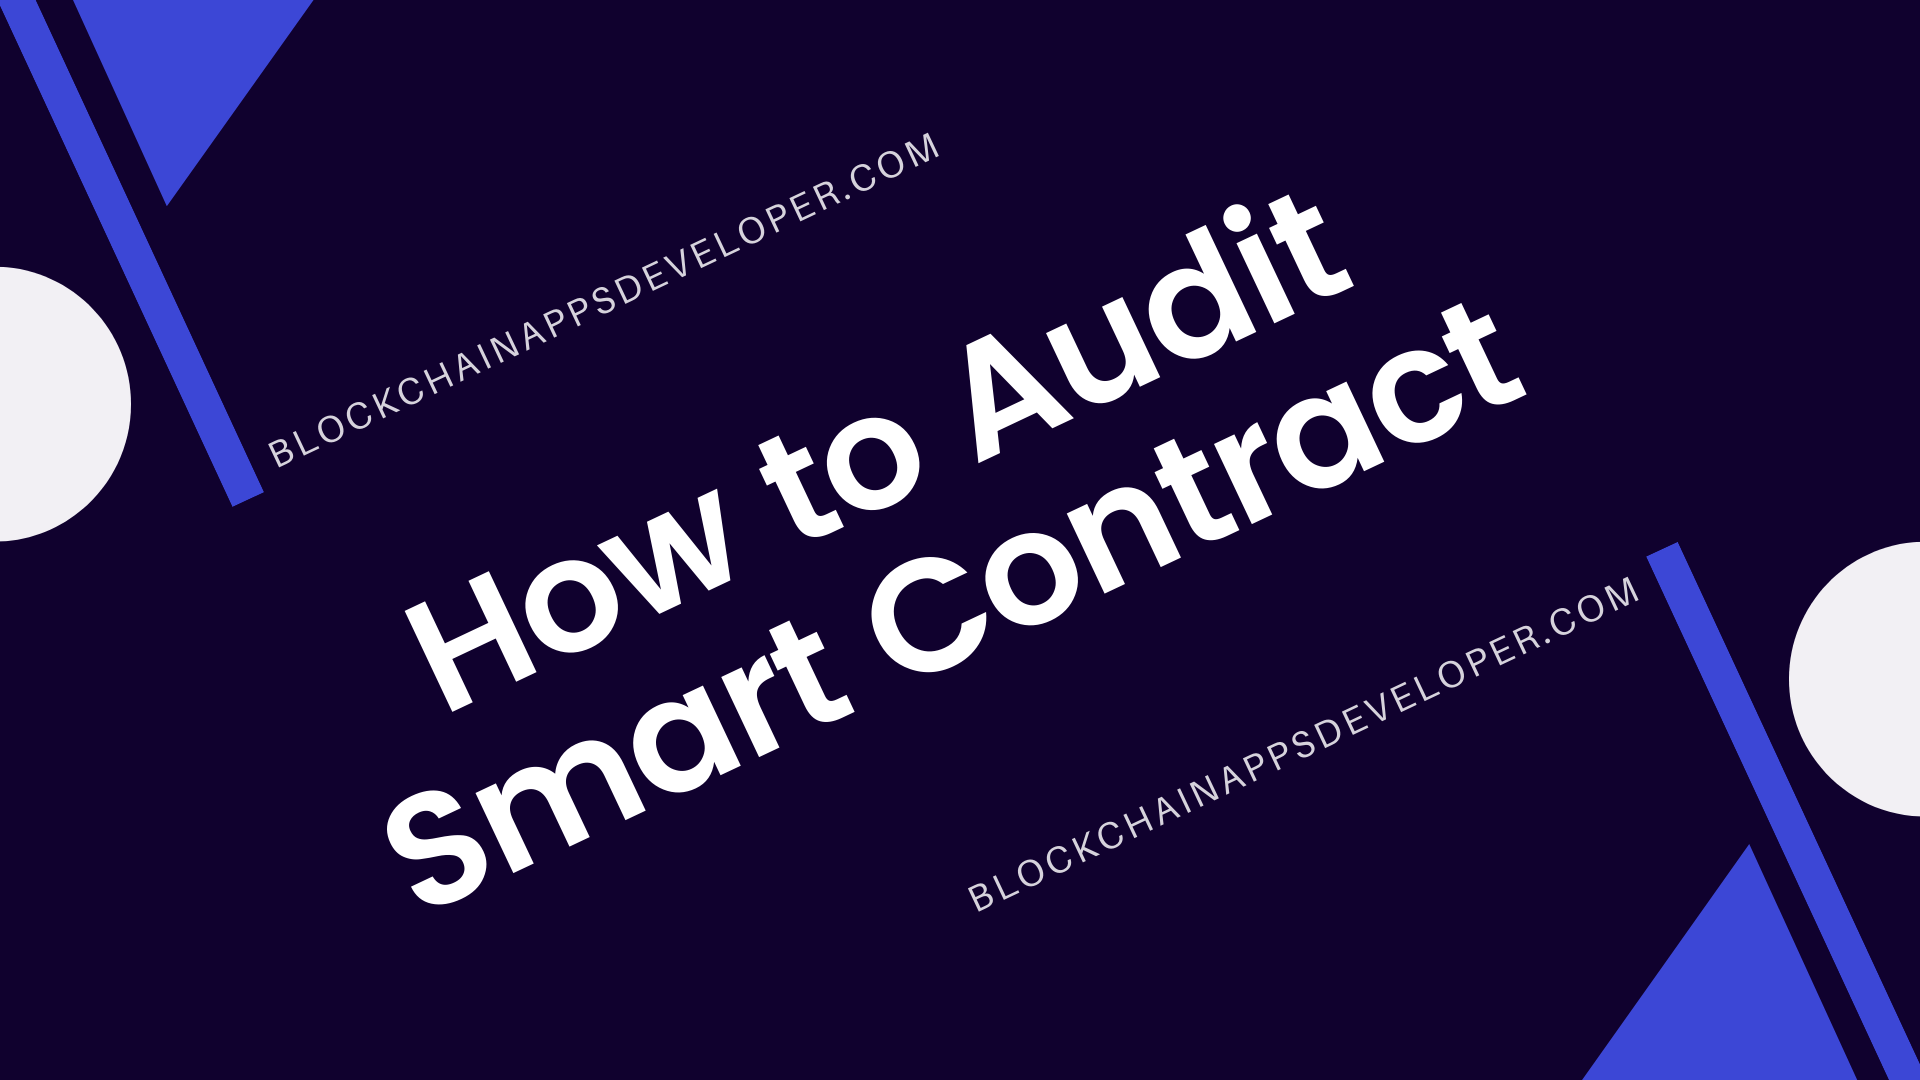 How to Audit Smart Contract?